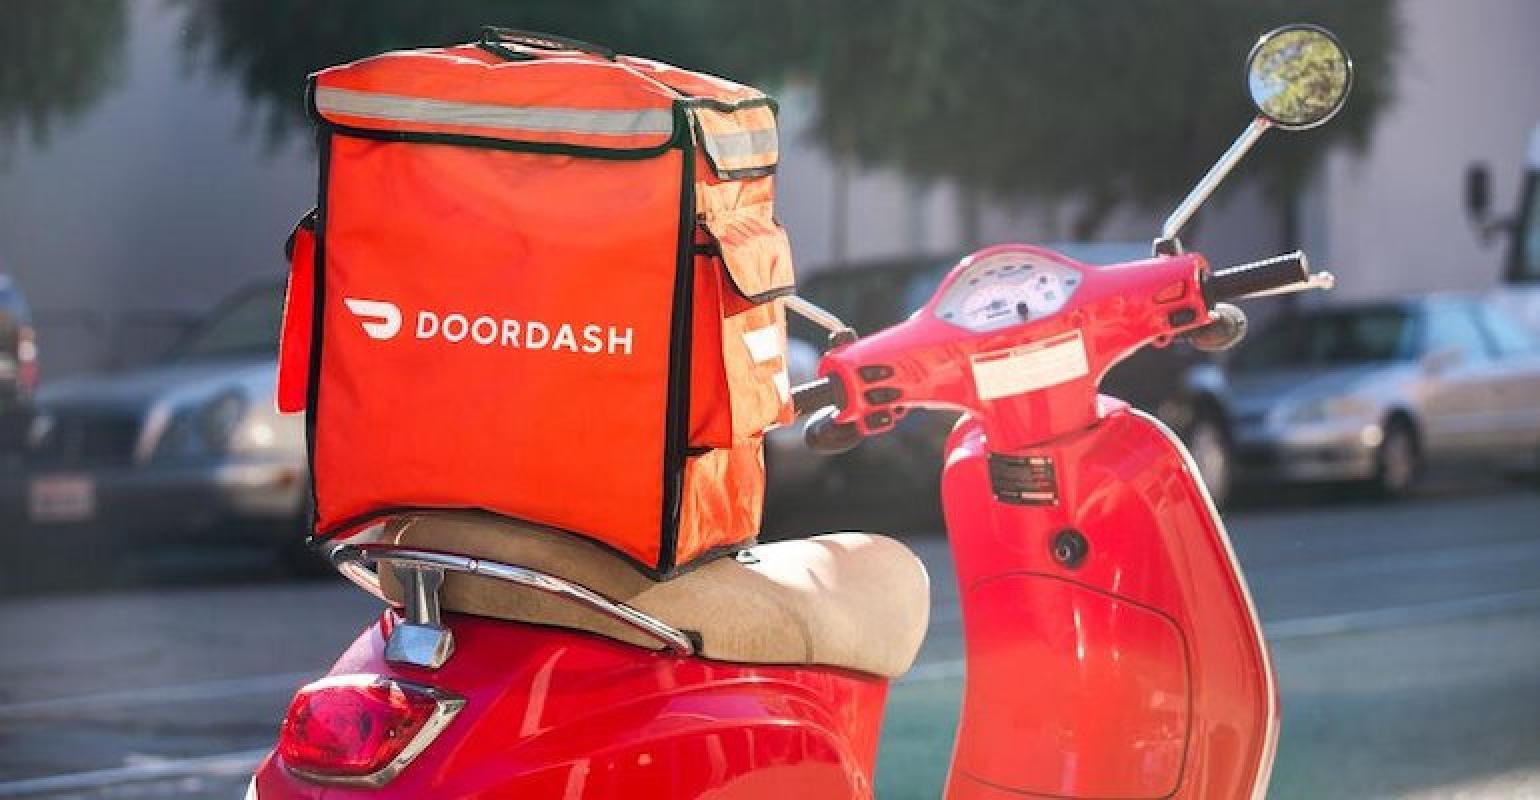 Exclusive: Low tips, long waits: DoorDash takes on drivers